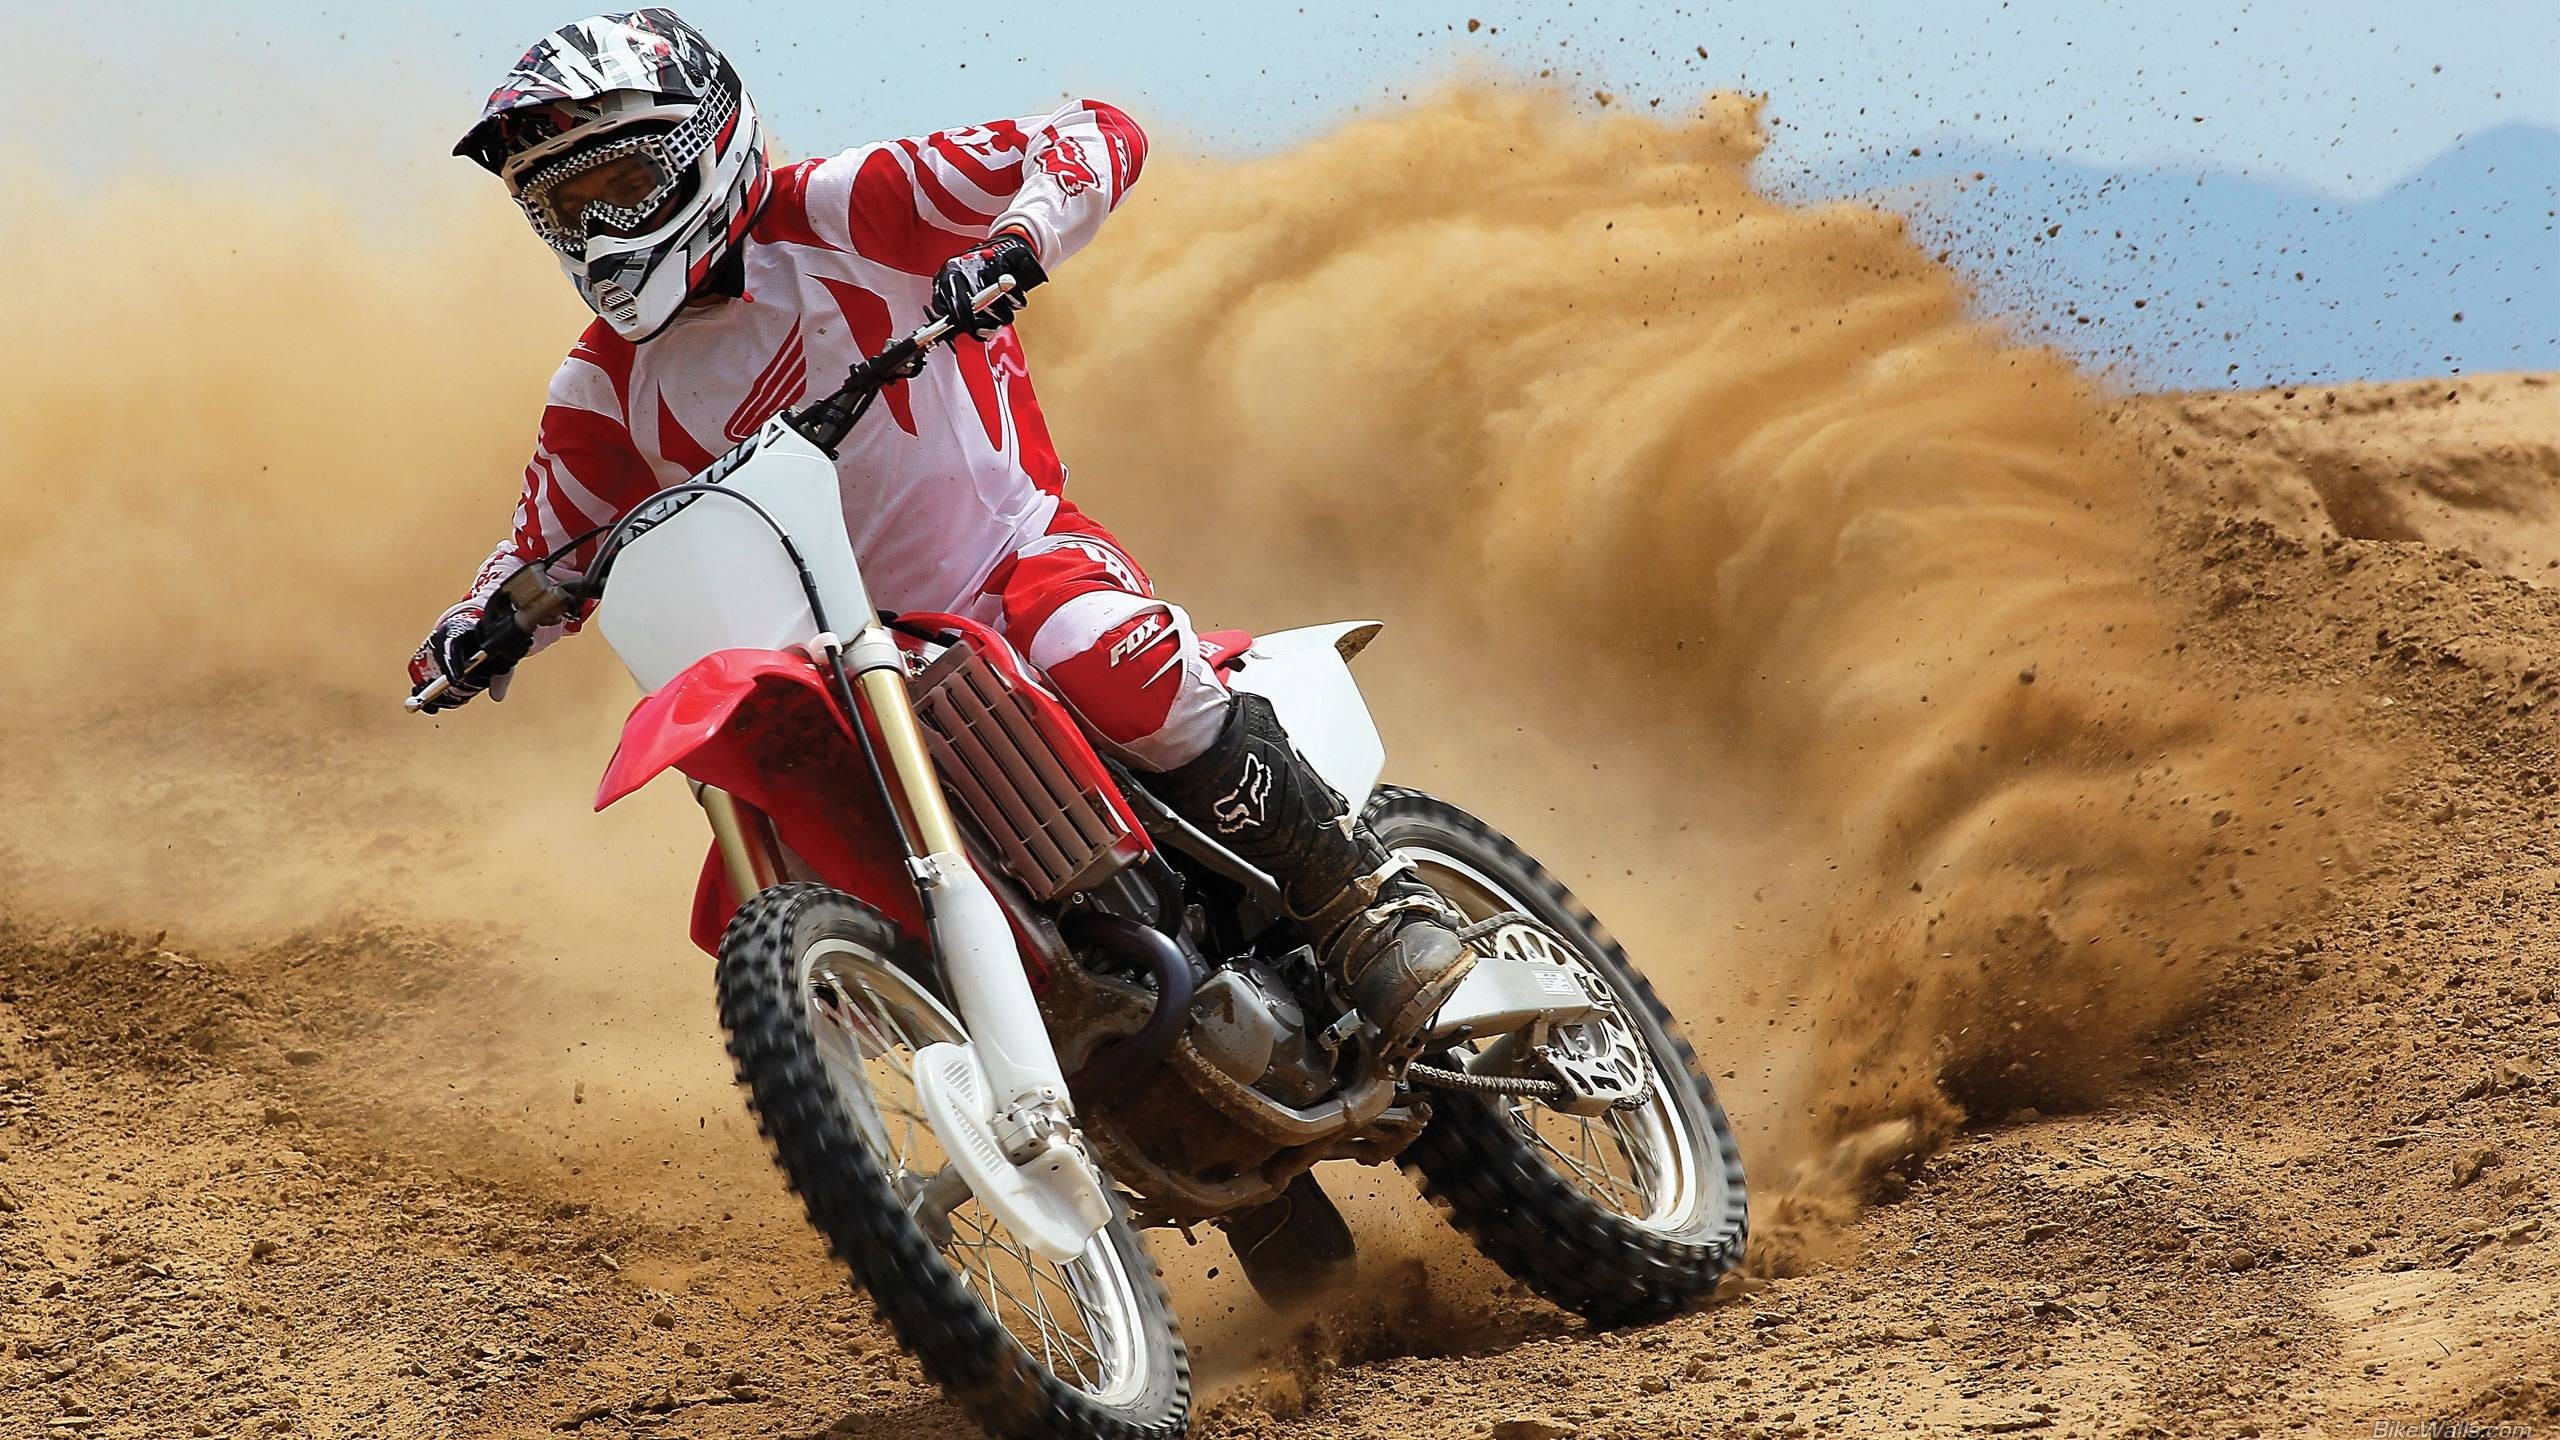 Motorcycle Racing: Honda CR, Freestyle Motocross, Dirt Track Racing Requires Specialized Tires With Reinforced Tread. 2560x1440 HD Wallpaper.